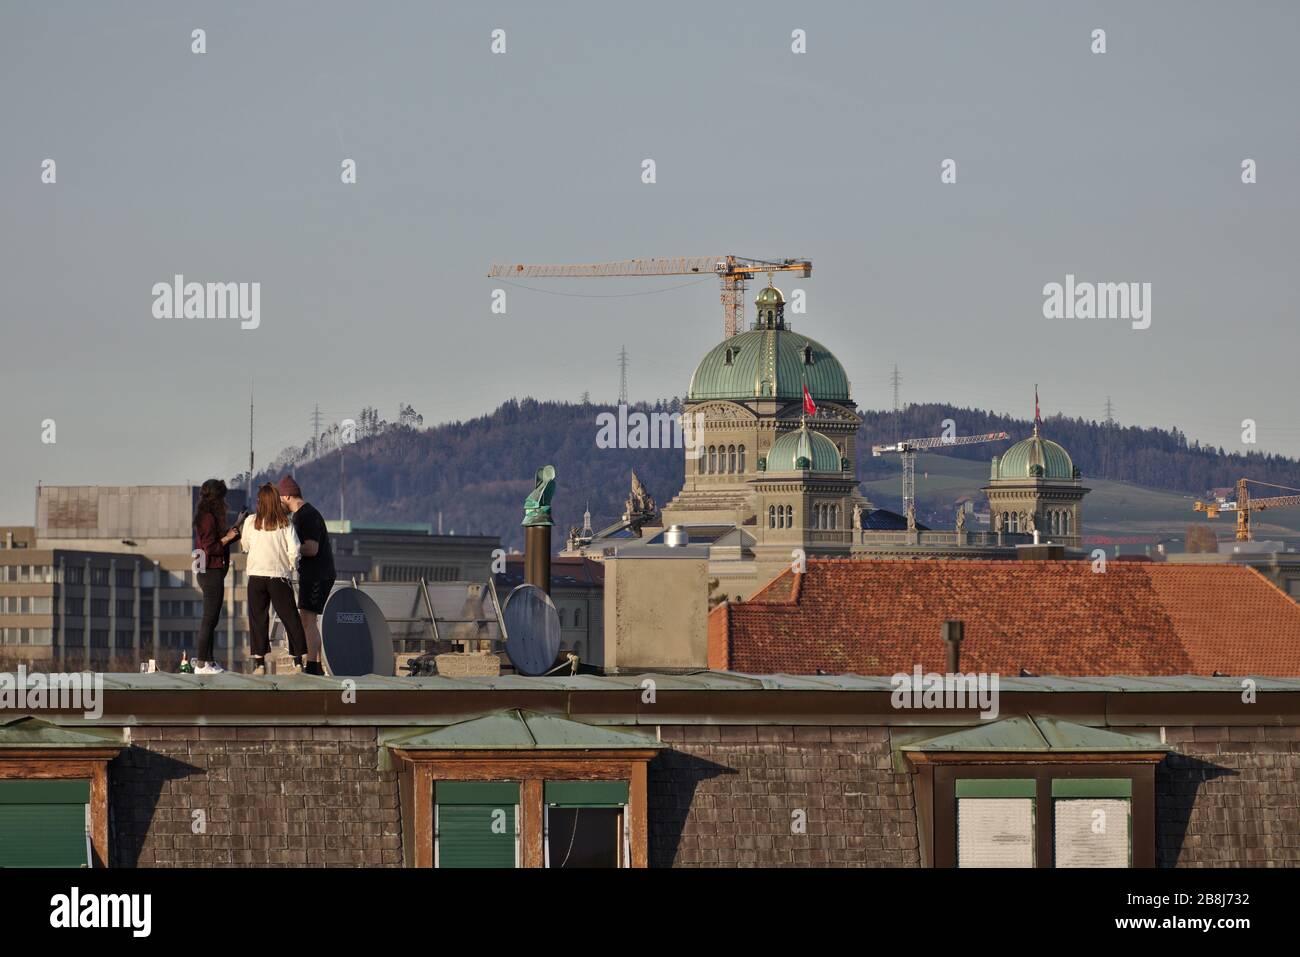 Bern, Switzerland, March 2020: Federal Council ordering people to stay home due to Coronavirus pandemic. Young adults on roof in front of parliament. Stock Photo